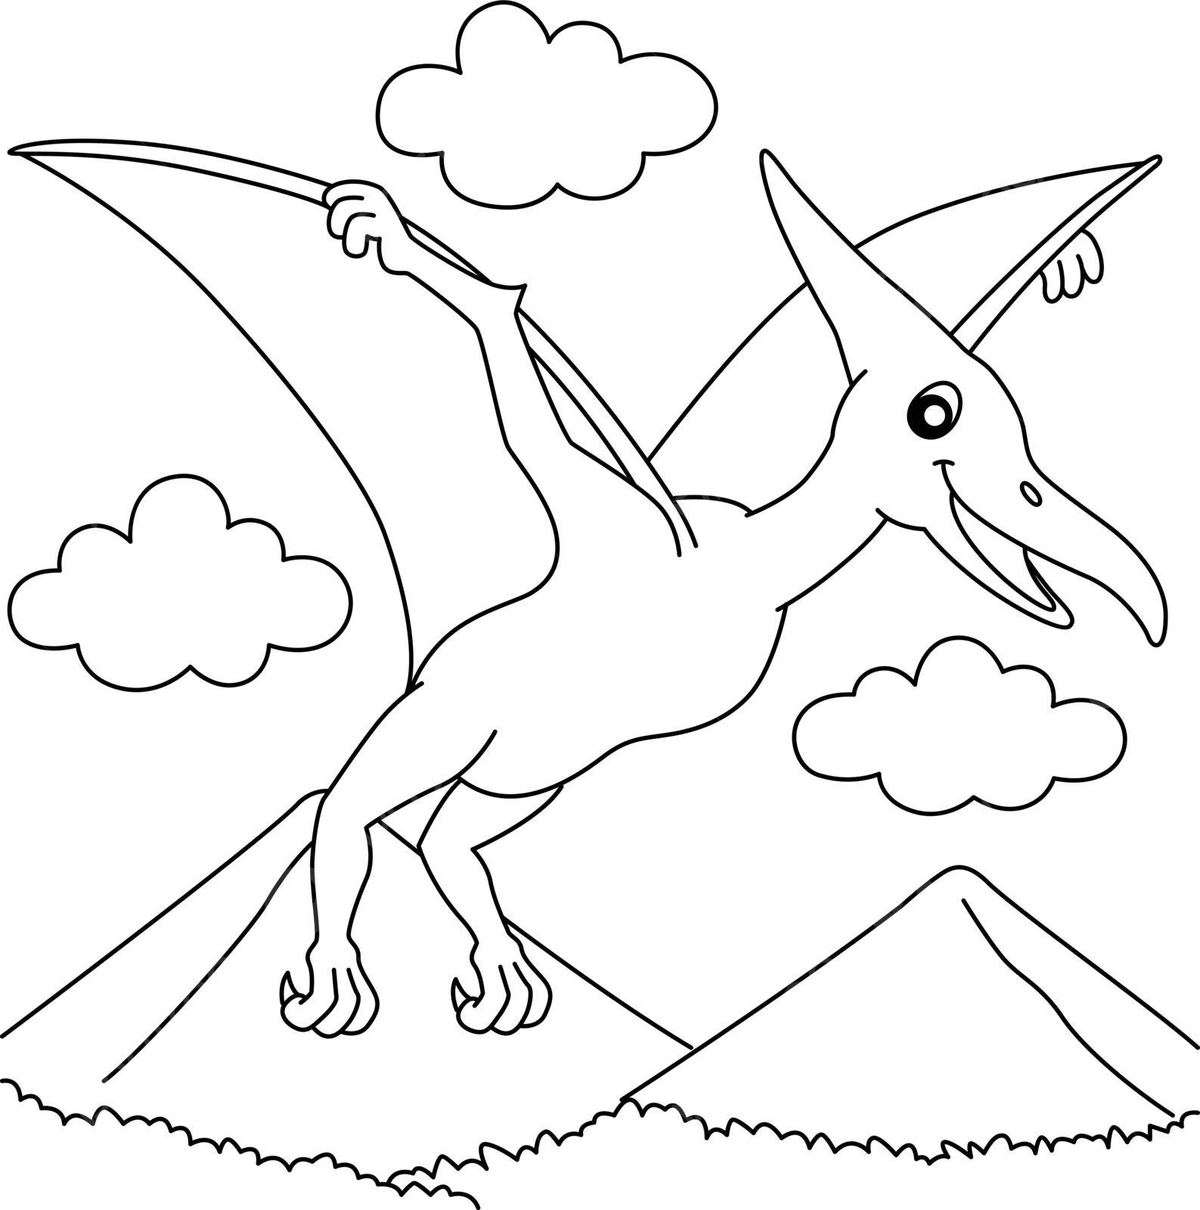 Pterodactyl coloring page for kids colouring book drawing background vector book drawing wing drawing ring drawing png and vector with transparent background for free download